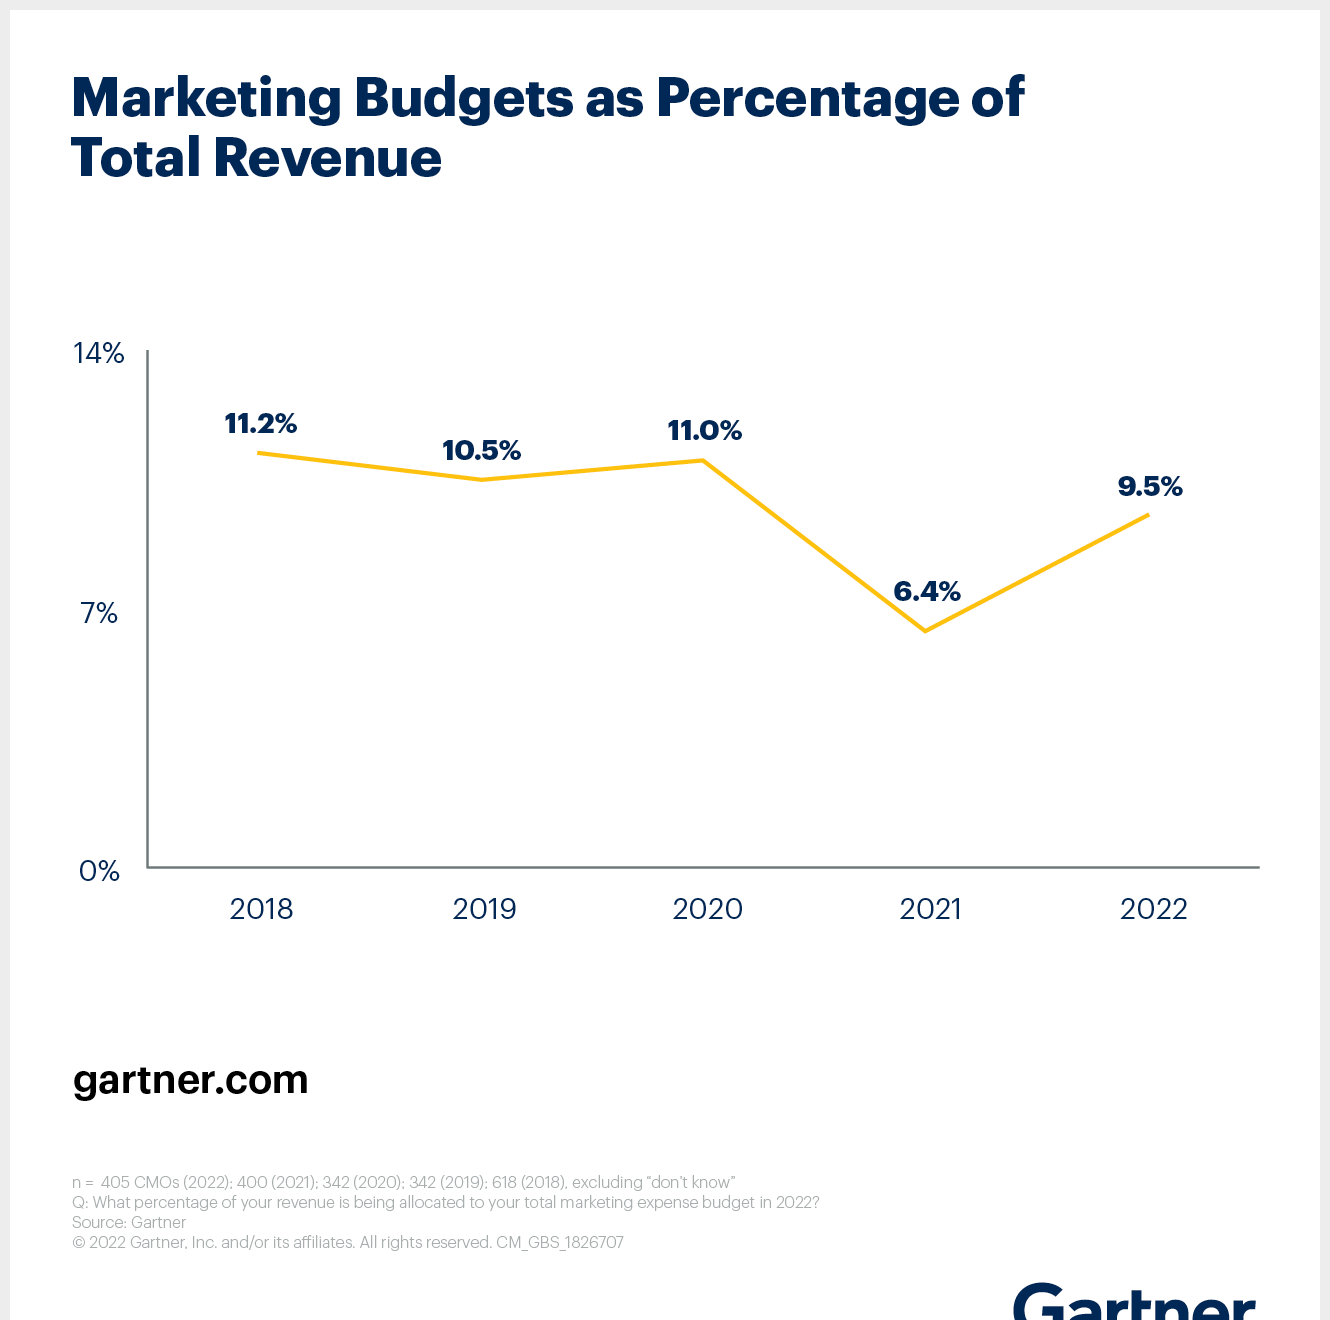 Marketing Budgets as Percentage of Total Revenue